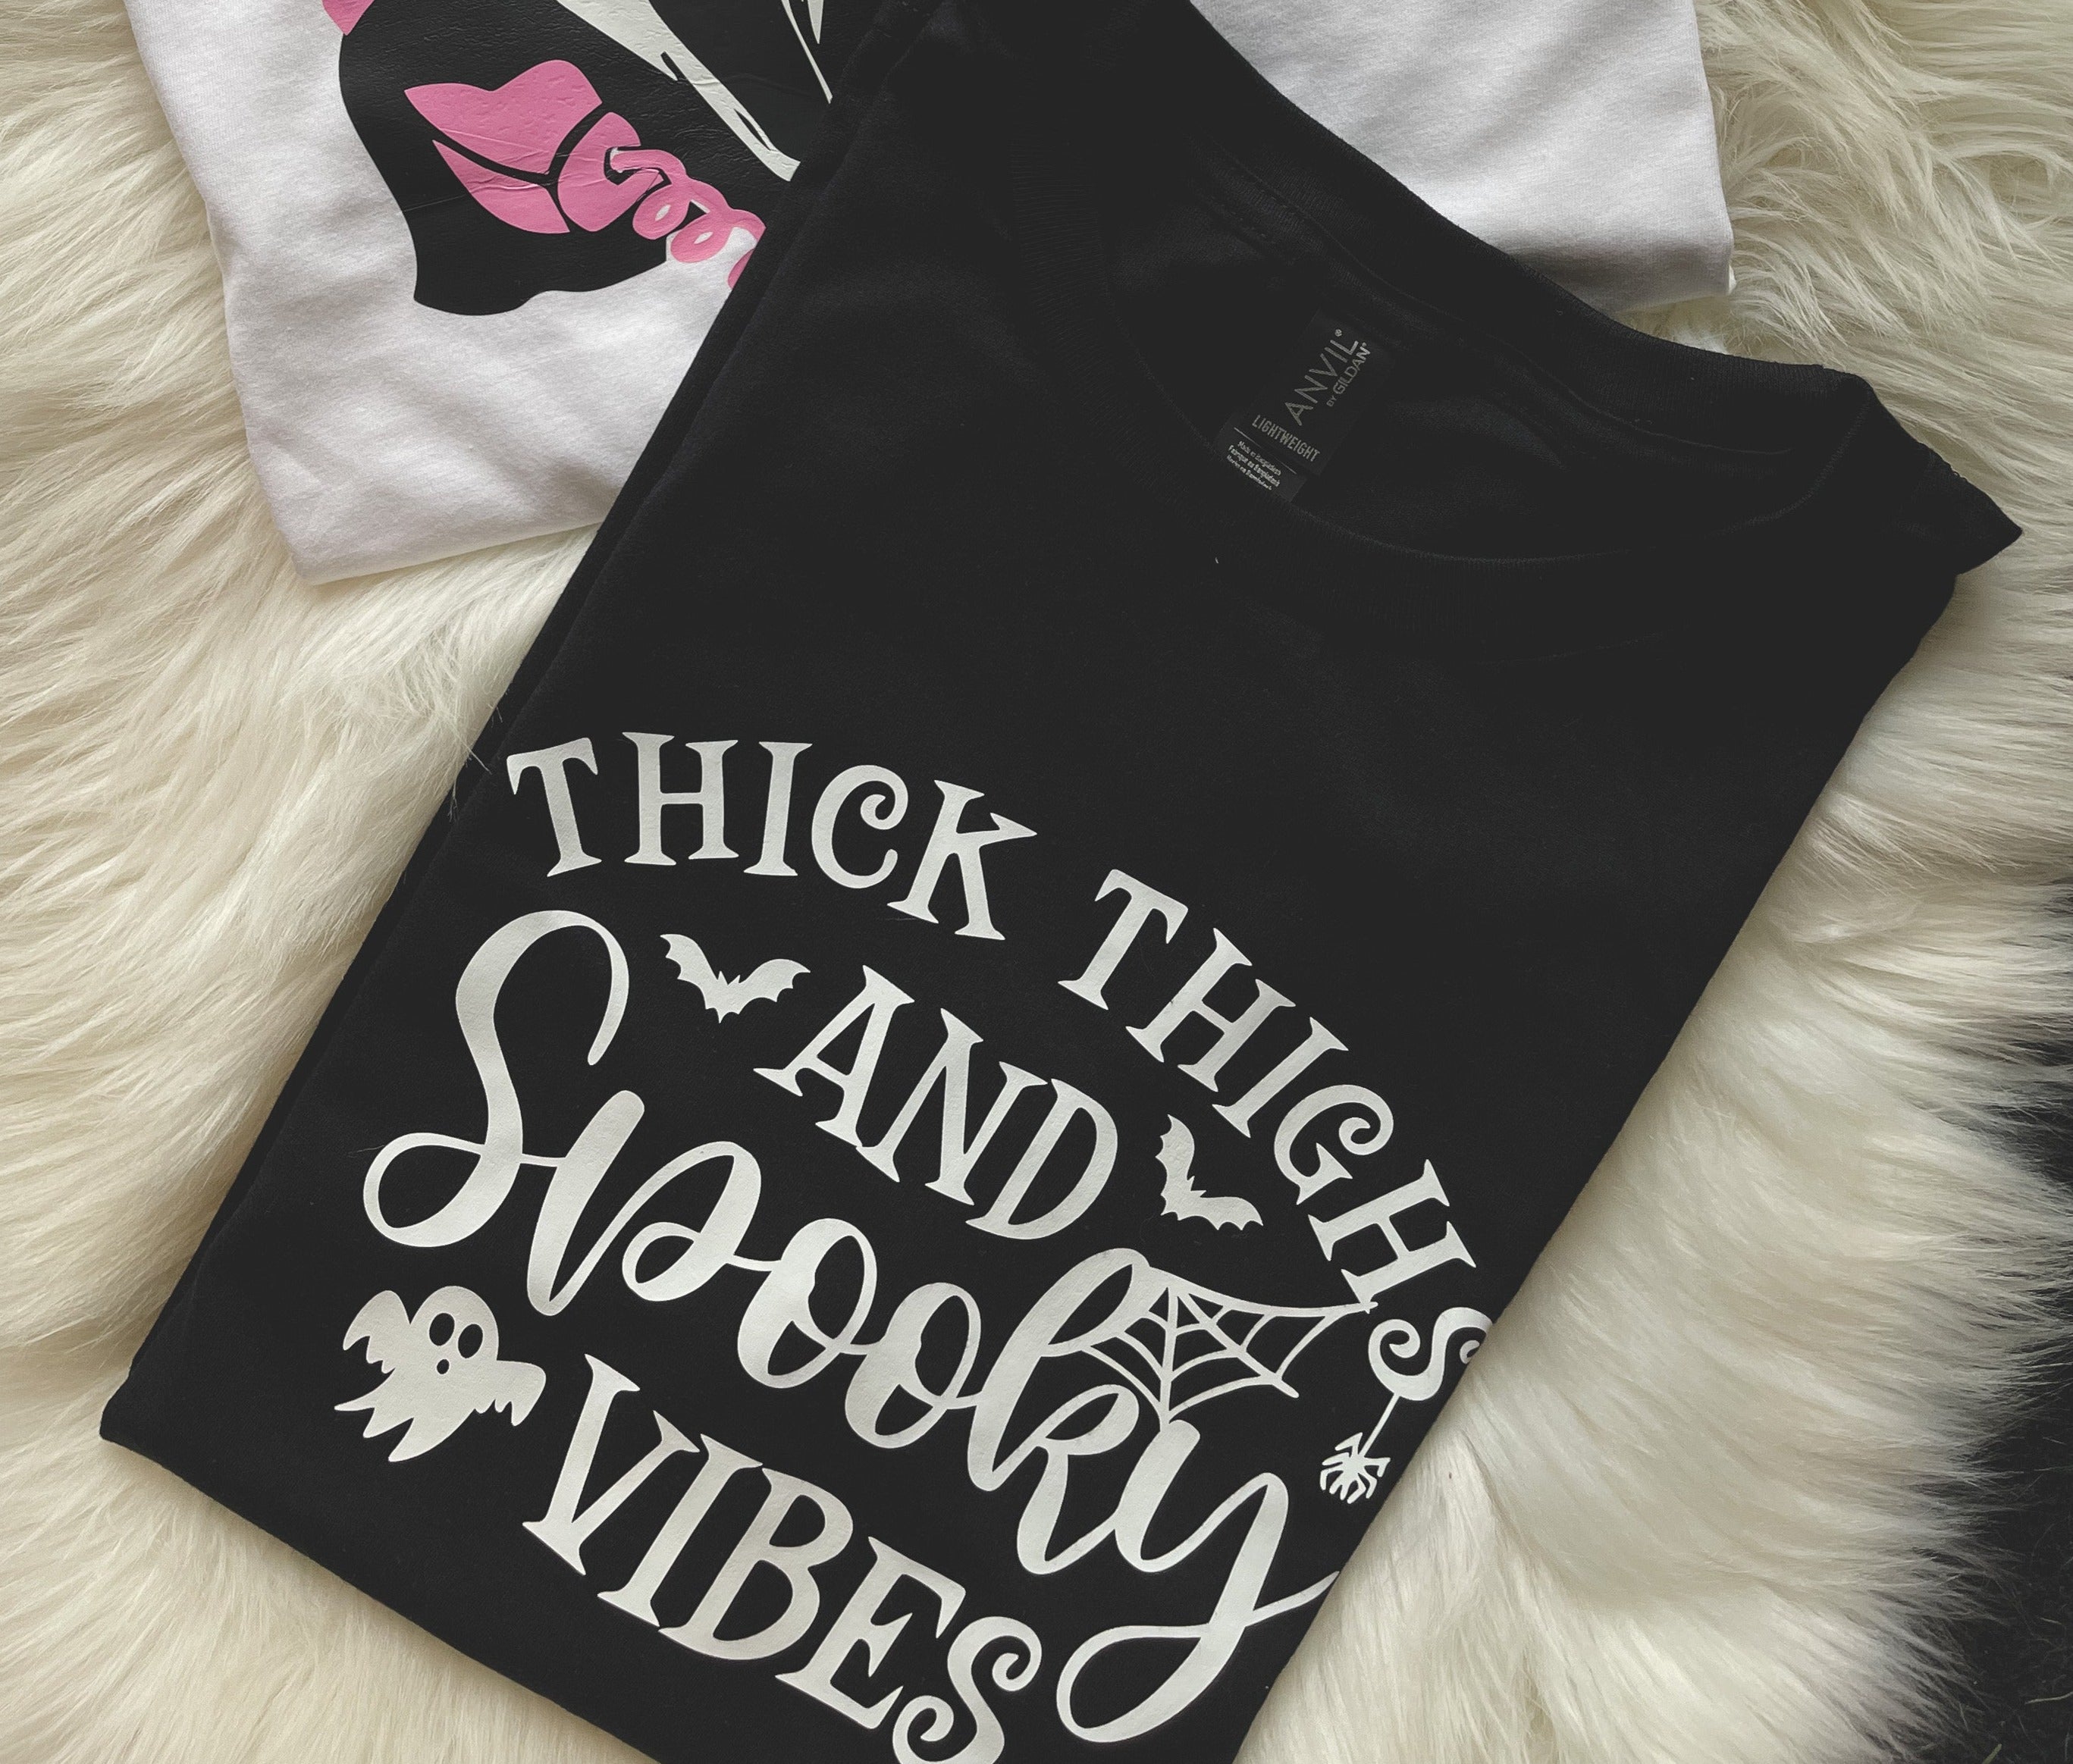 Thick Thighs & Spooky Vibes (Tee)